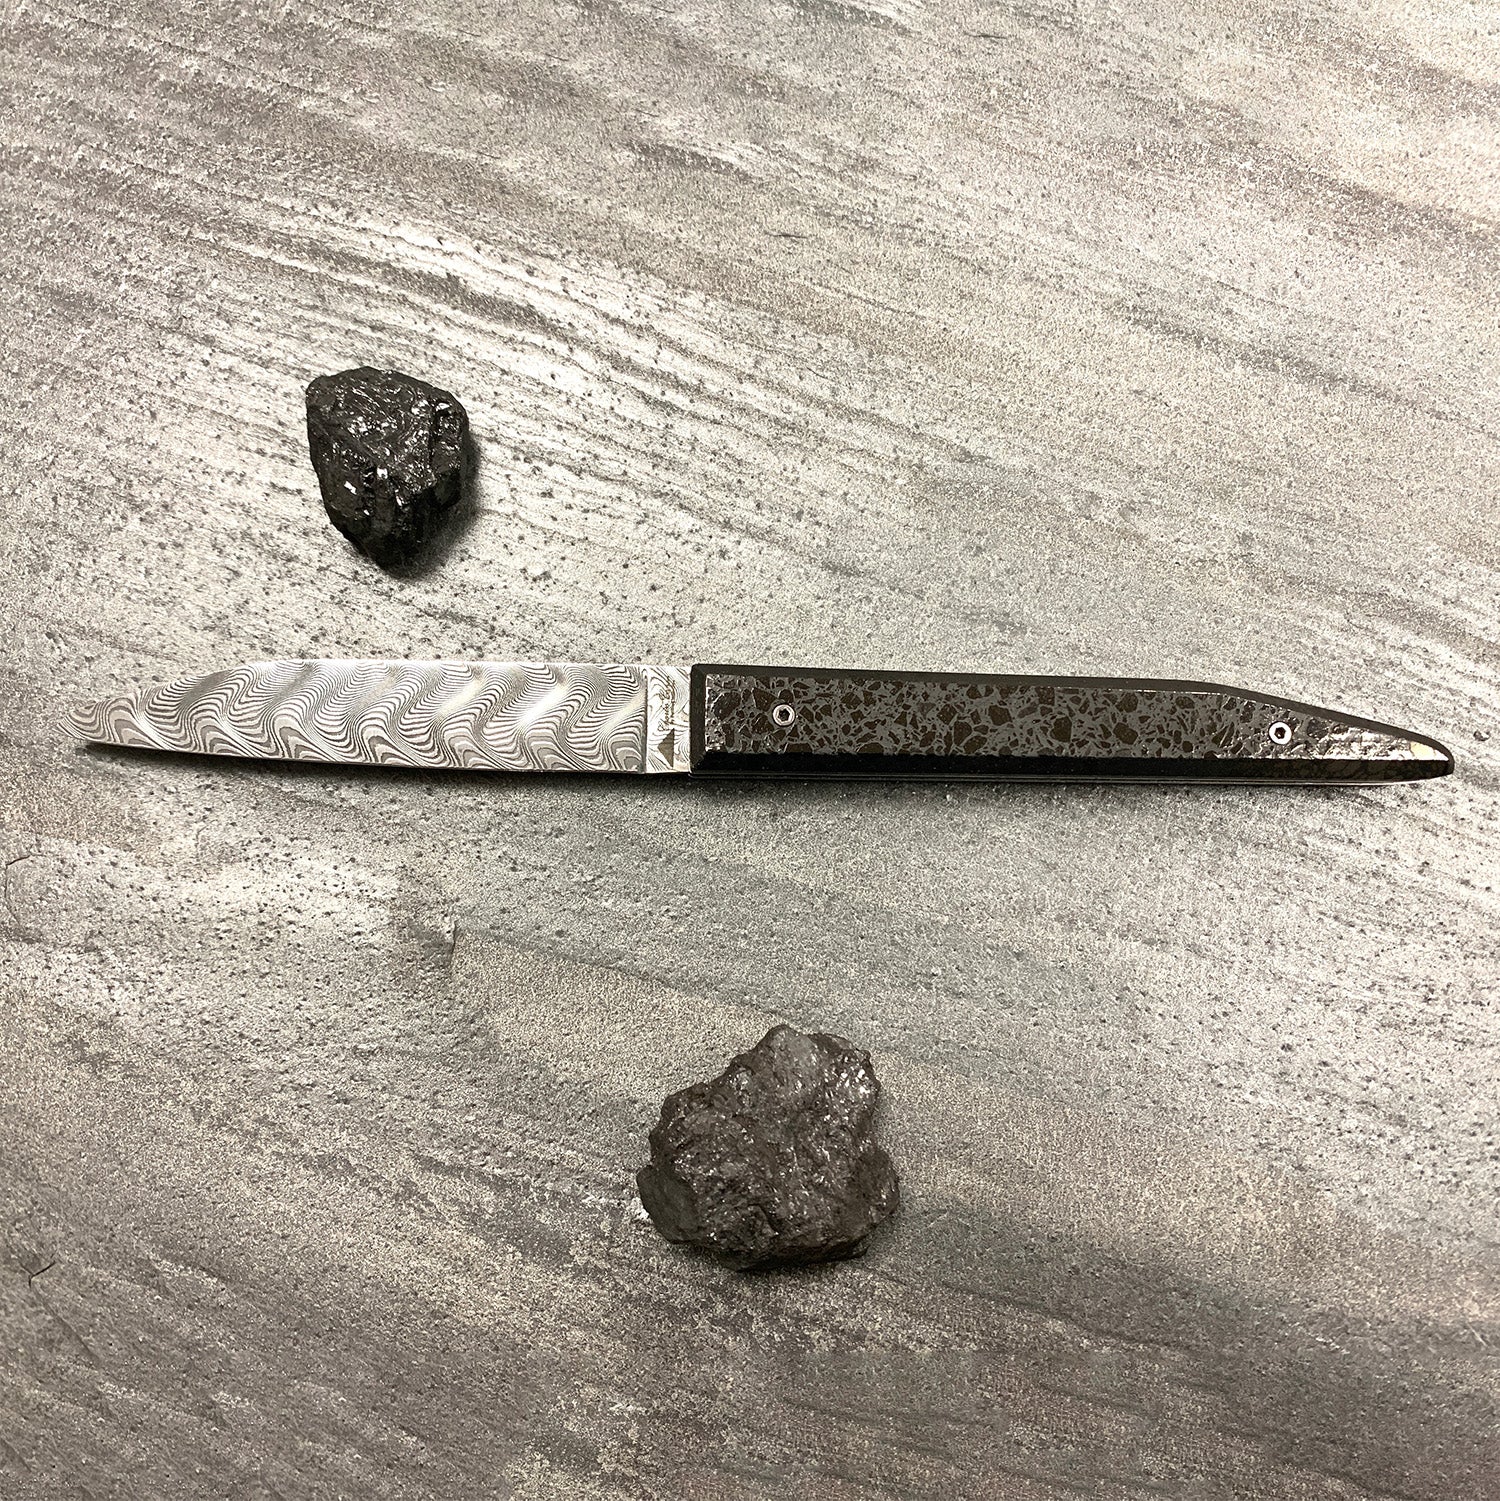 The slag heap: folding knife with its polished charcoal handle and its Damascus blade